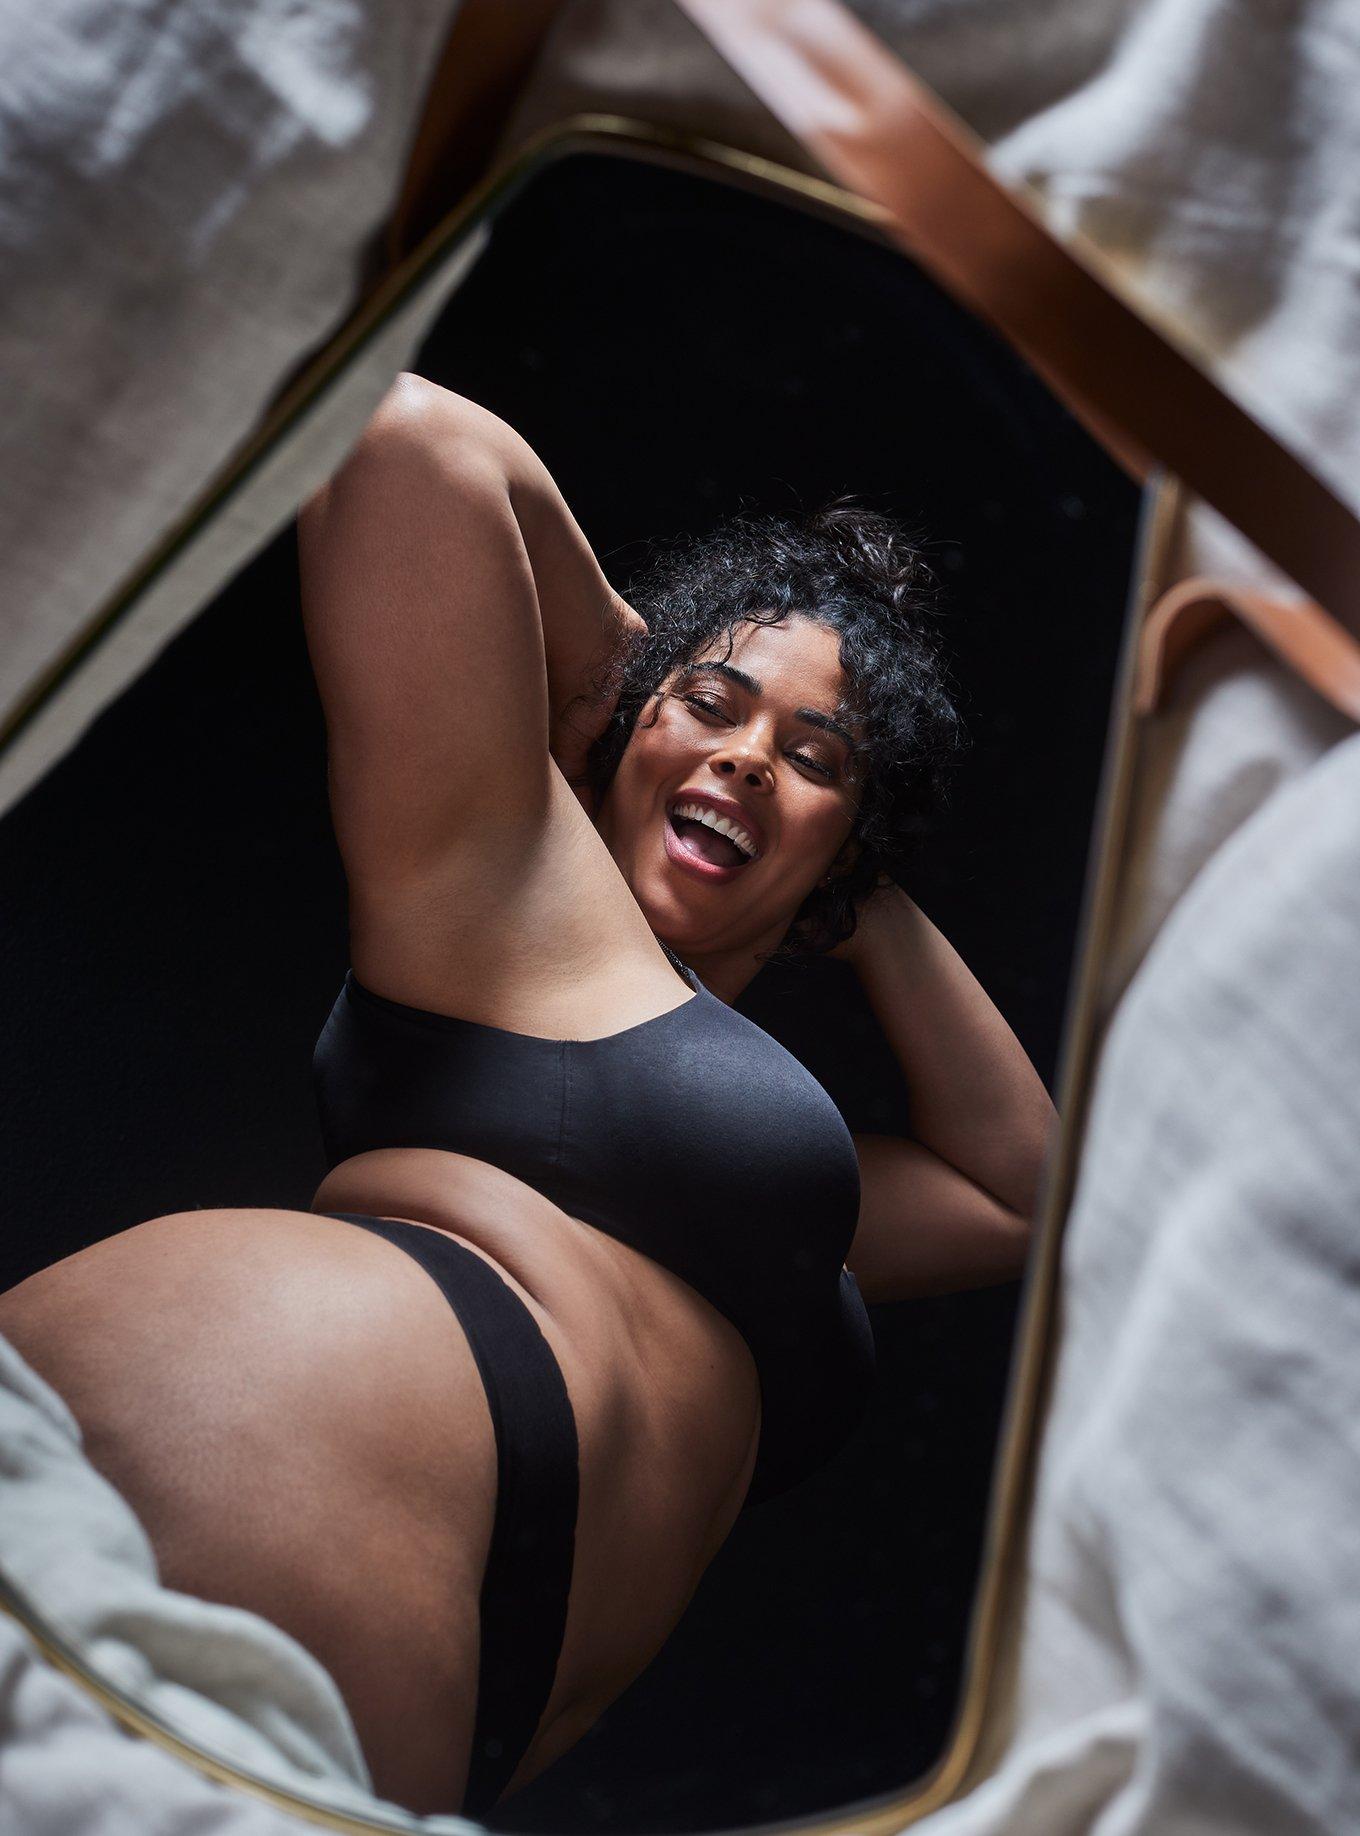 Torrid Bras Online, Nothing beats everyday comfort and no other brand beats  the everyday comfort of Torrid's wireless bras! Even with no wires, our bras  are still supportive, stylish, and oh-so-comfortable.